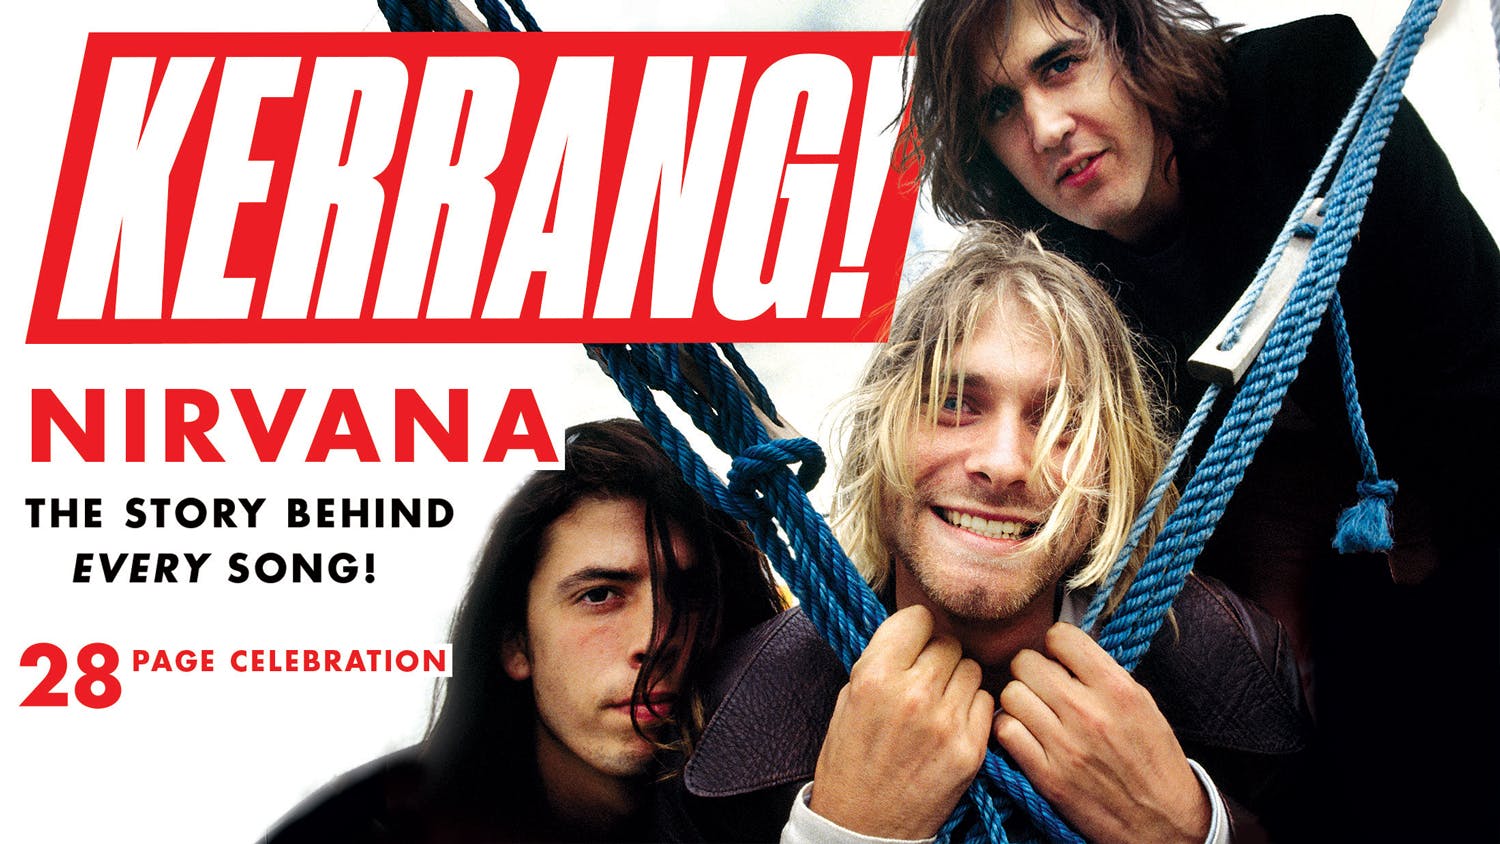 Nirvana: The Story Behind Every Song!